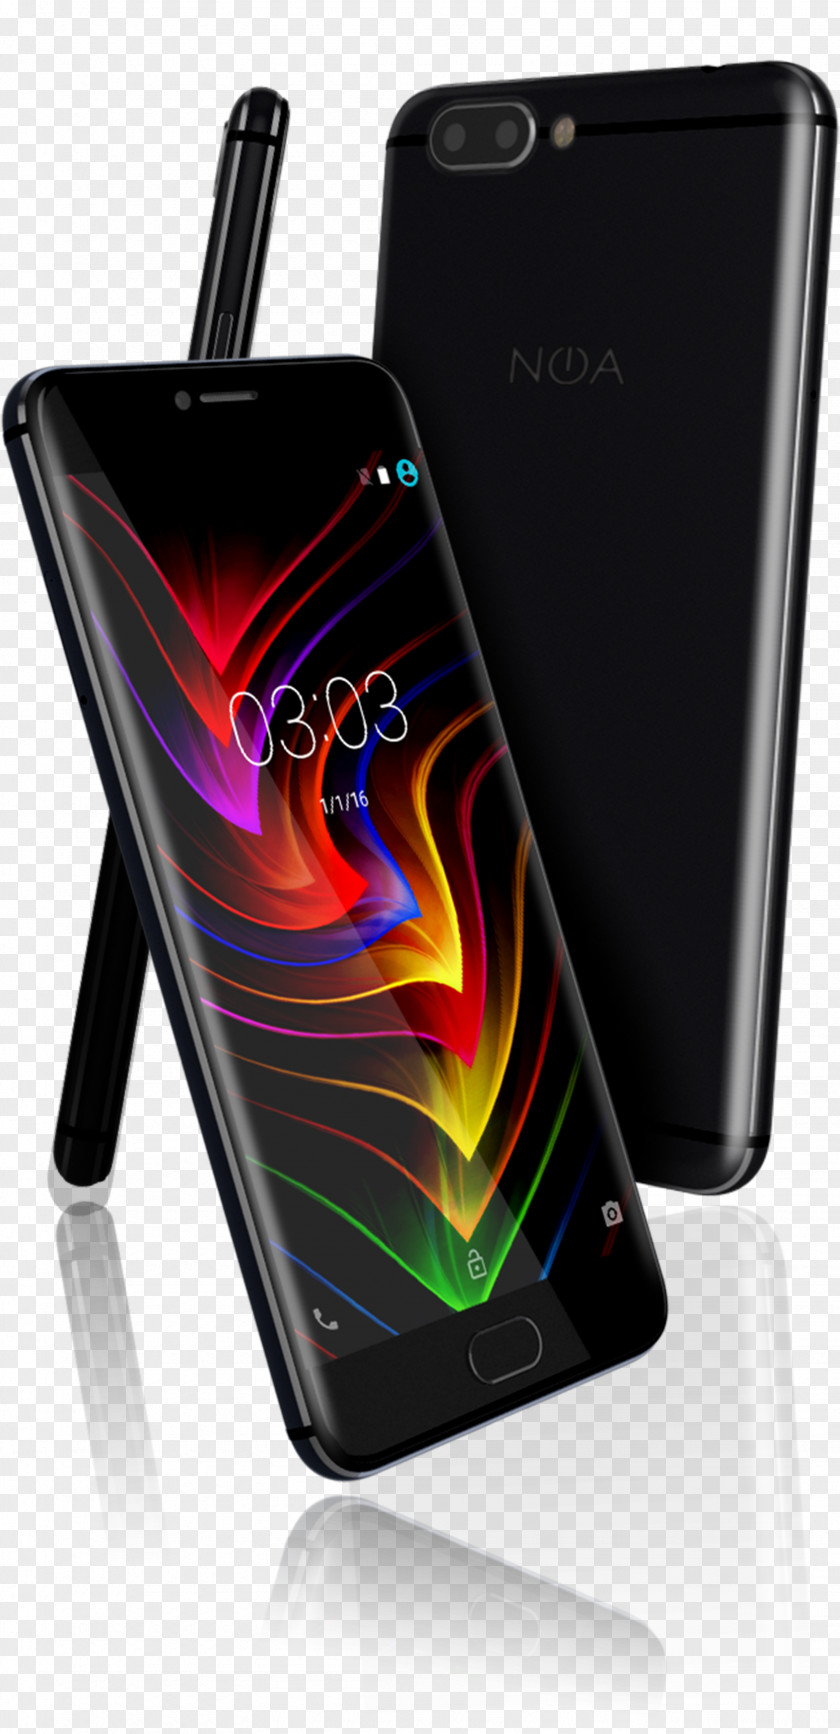 Press Smartphone Android Telephone Tablet Computers PNG